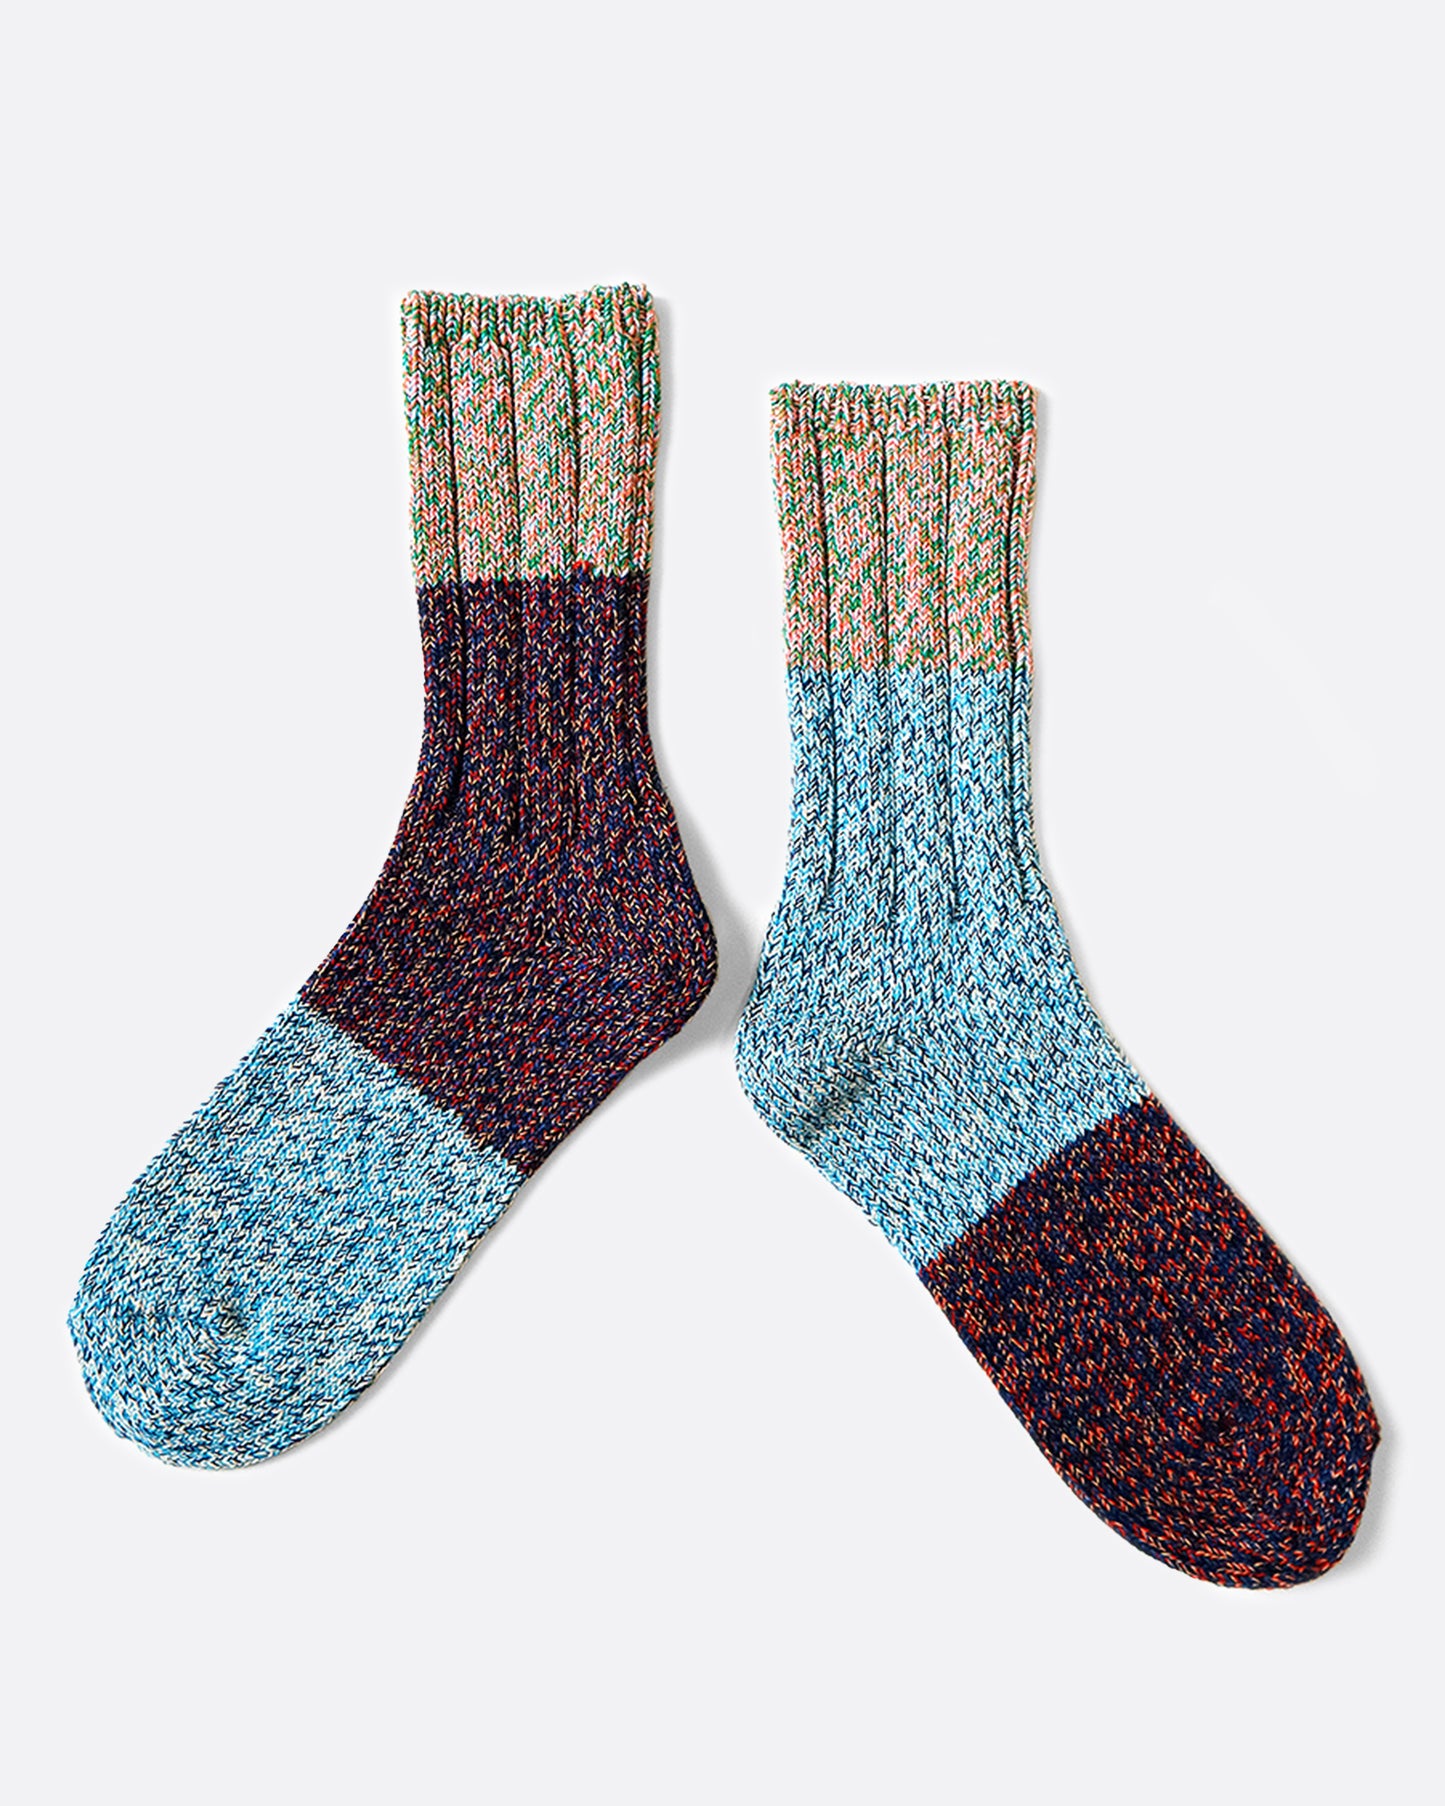 A pair of thick, loosely knit socks that are almost identical, but not quite.